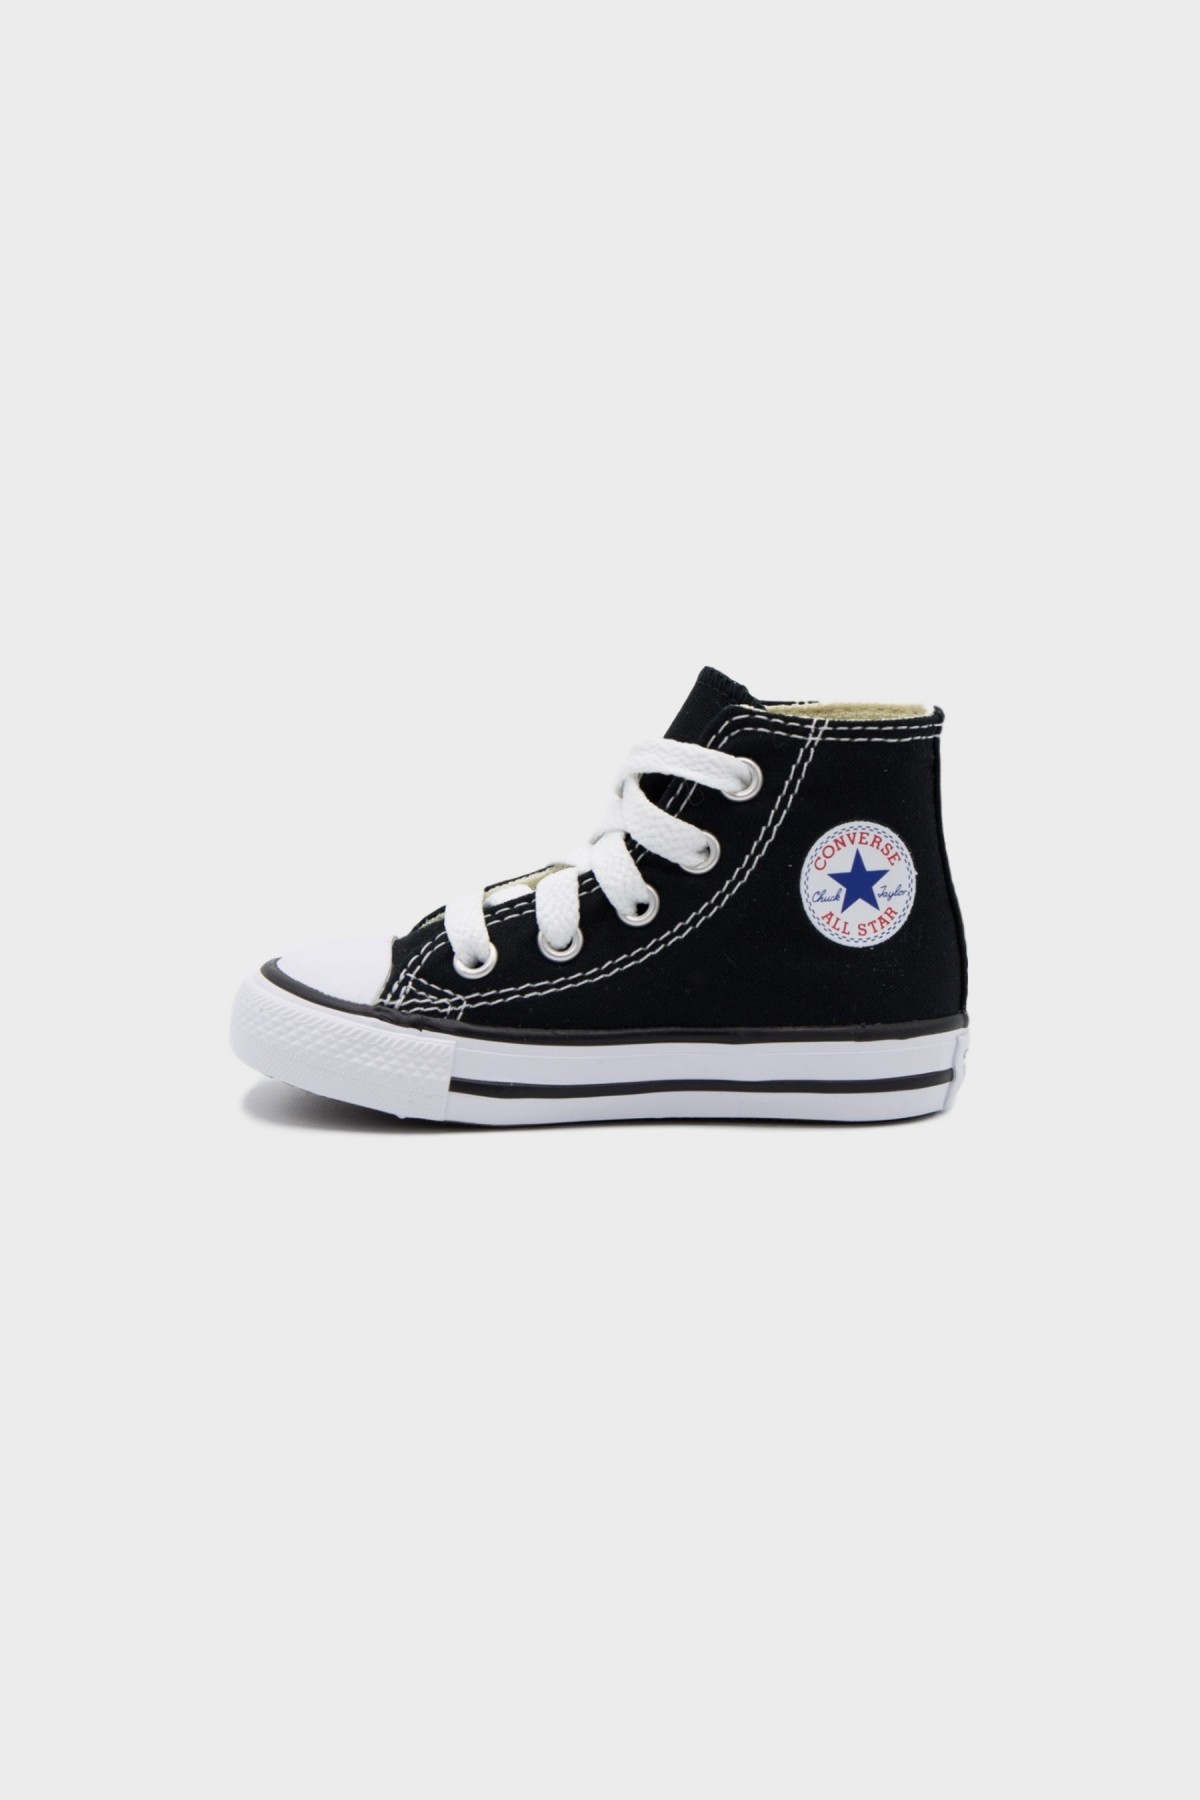 Converse All Stars High Infant in Black White